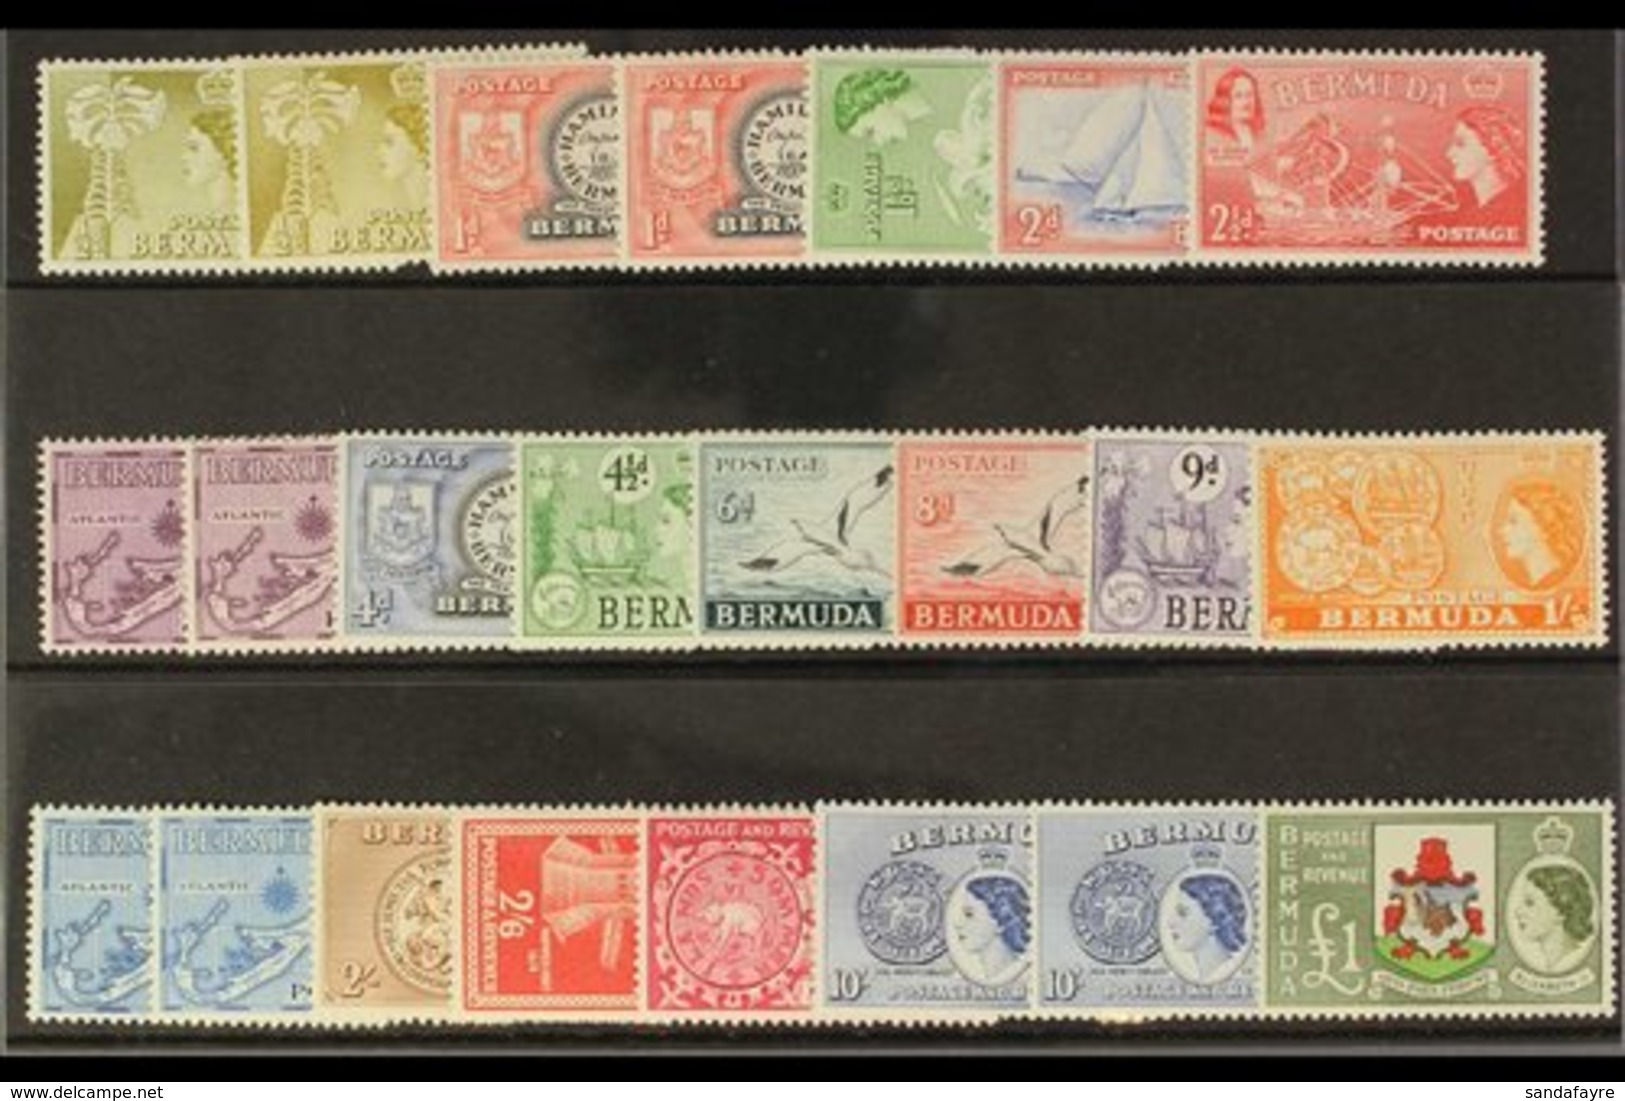 1953-62 Pictorial Definitive Set (SG 135/50) Plus Most Additional Listed Shade & Type Variants, Very Fine Lightly Hinged - Bermudes